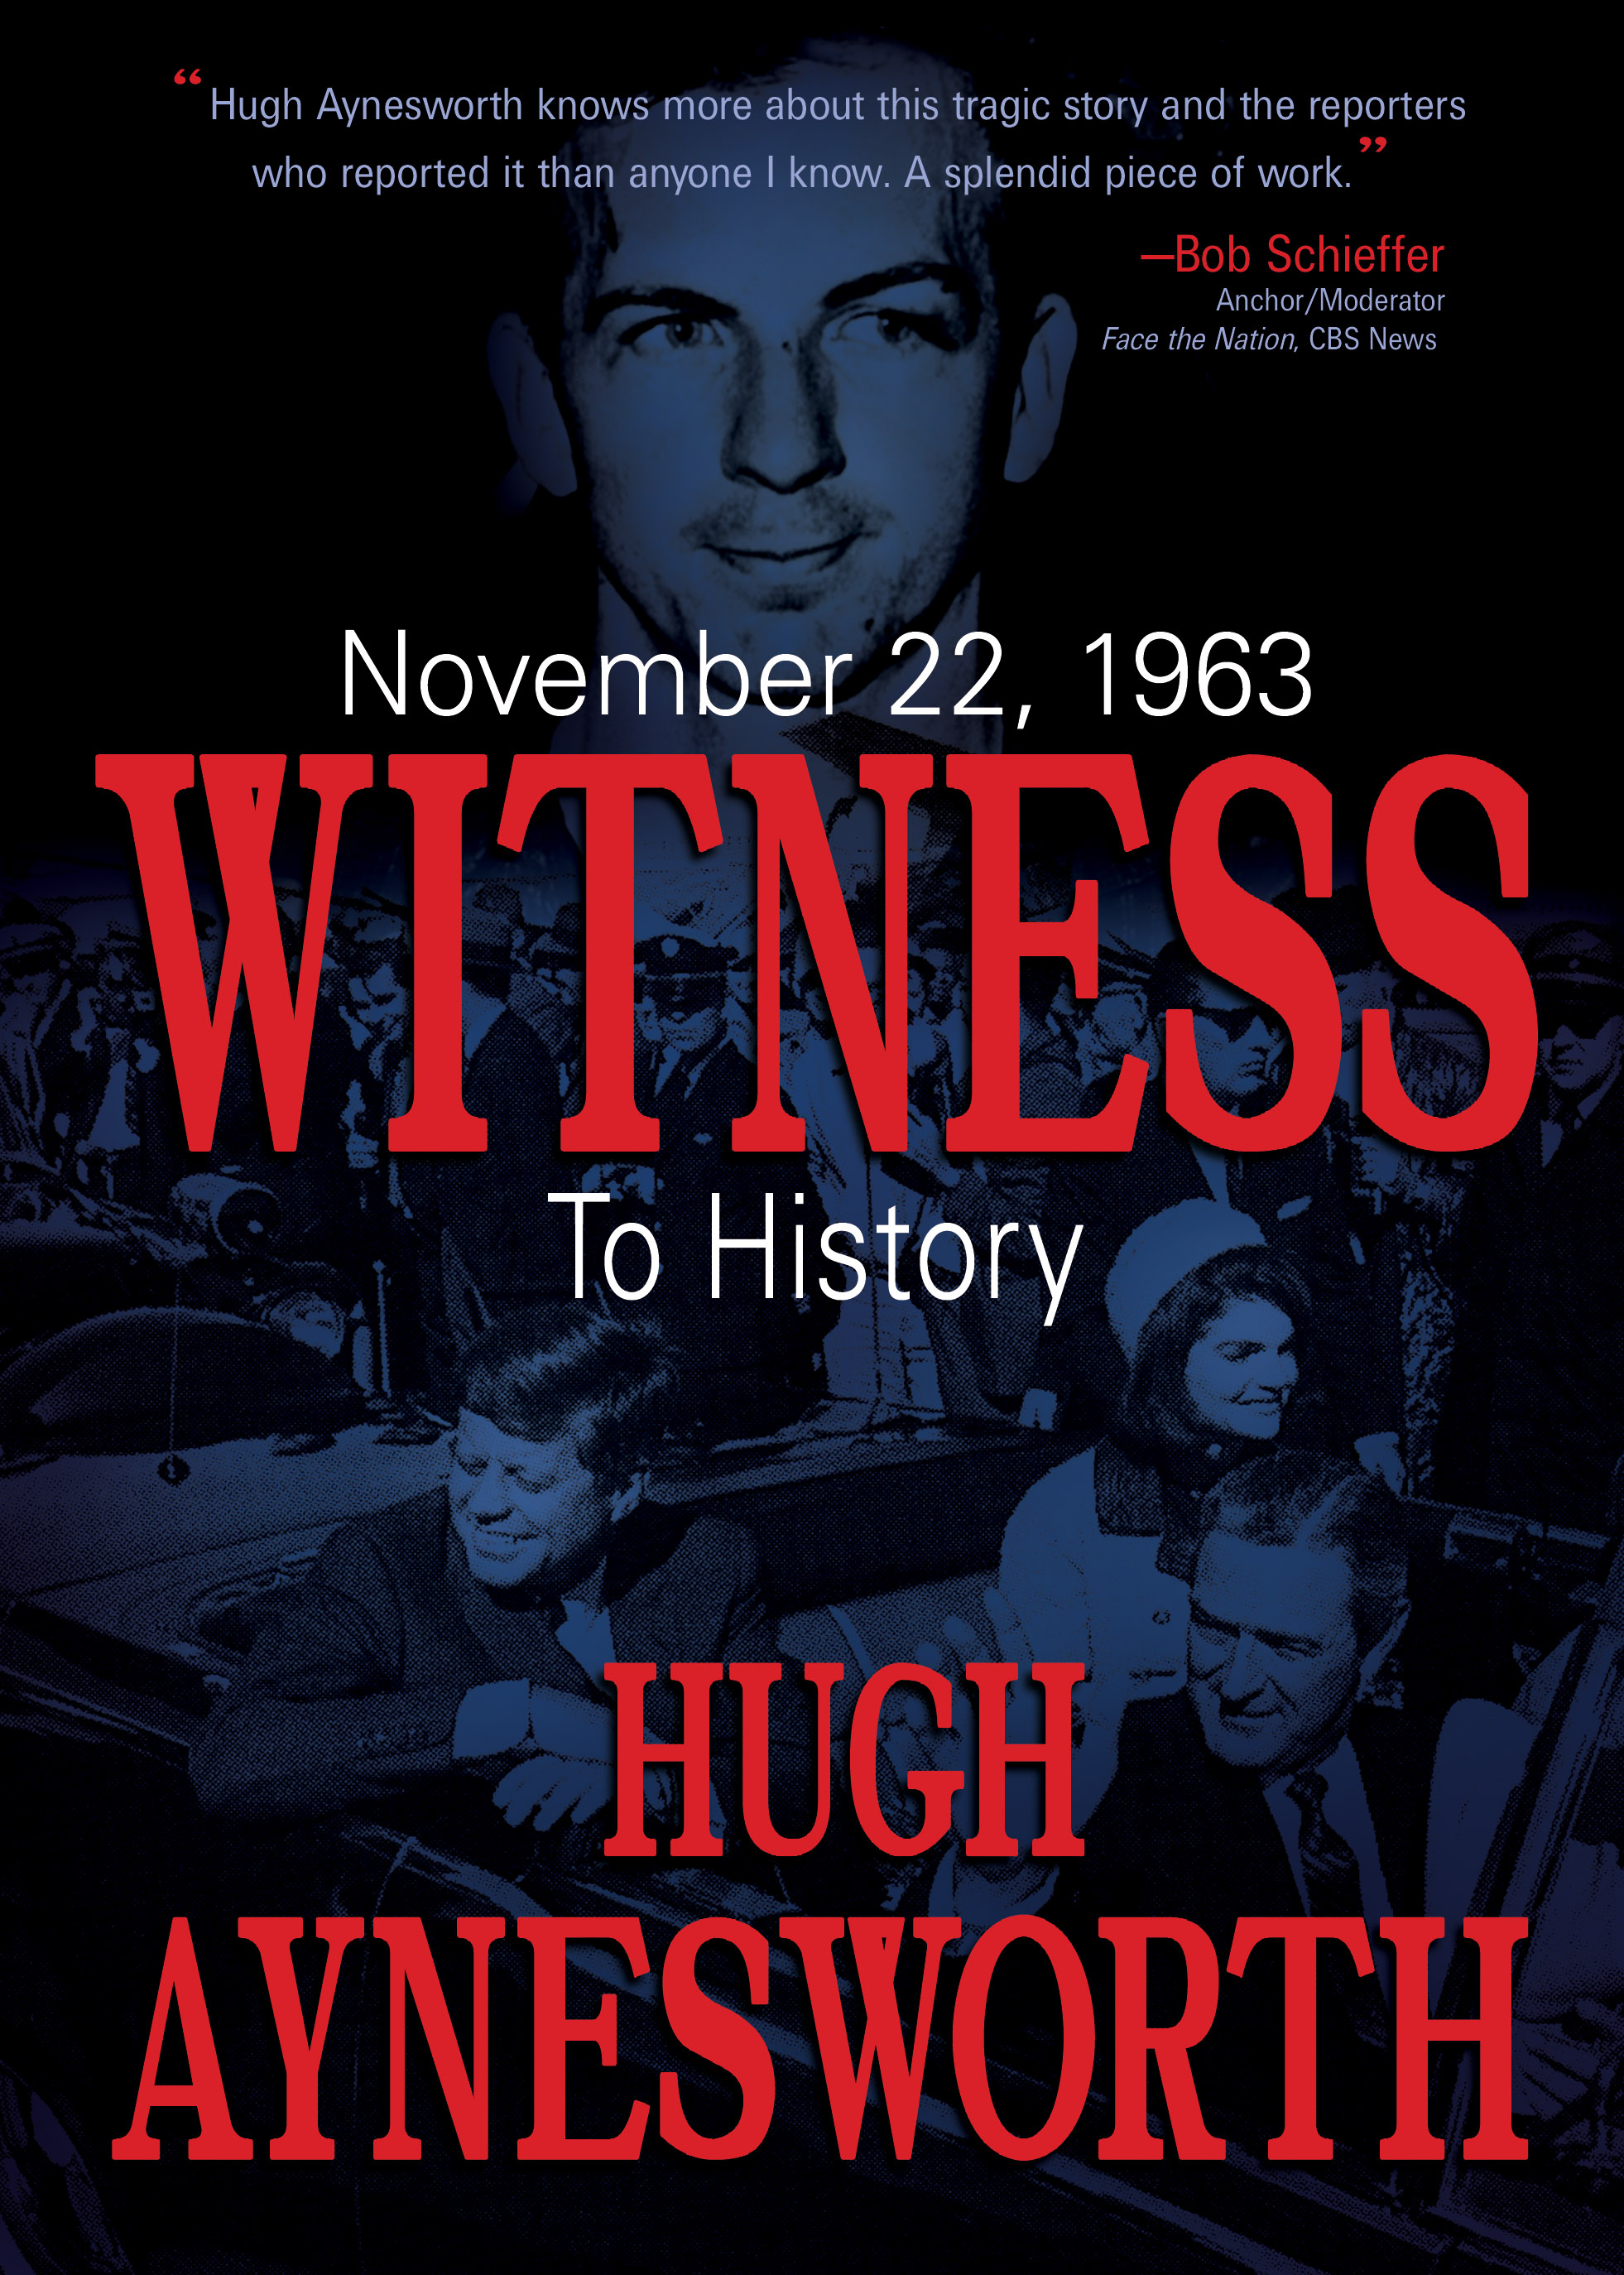 Hugh Aynesworth, recognized worldwide as one of the most respected authorities on the Kennedy assassination, reflects fifty years later...